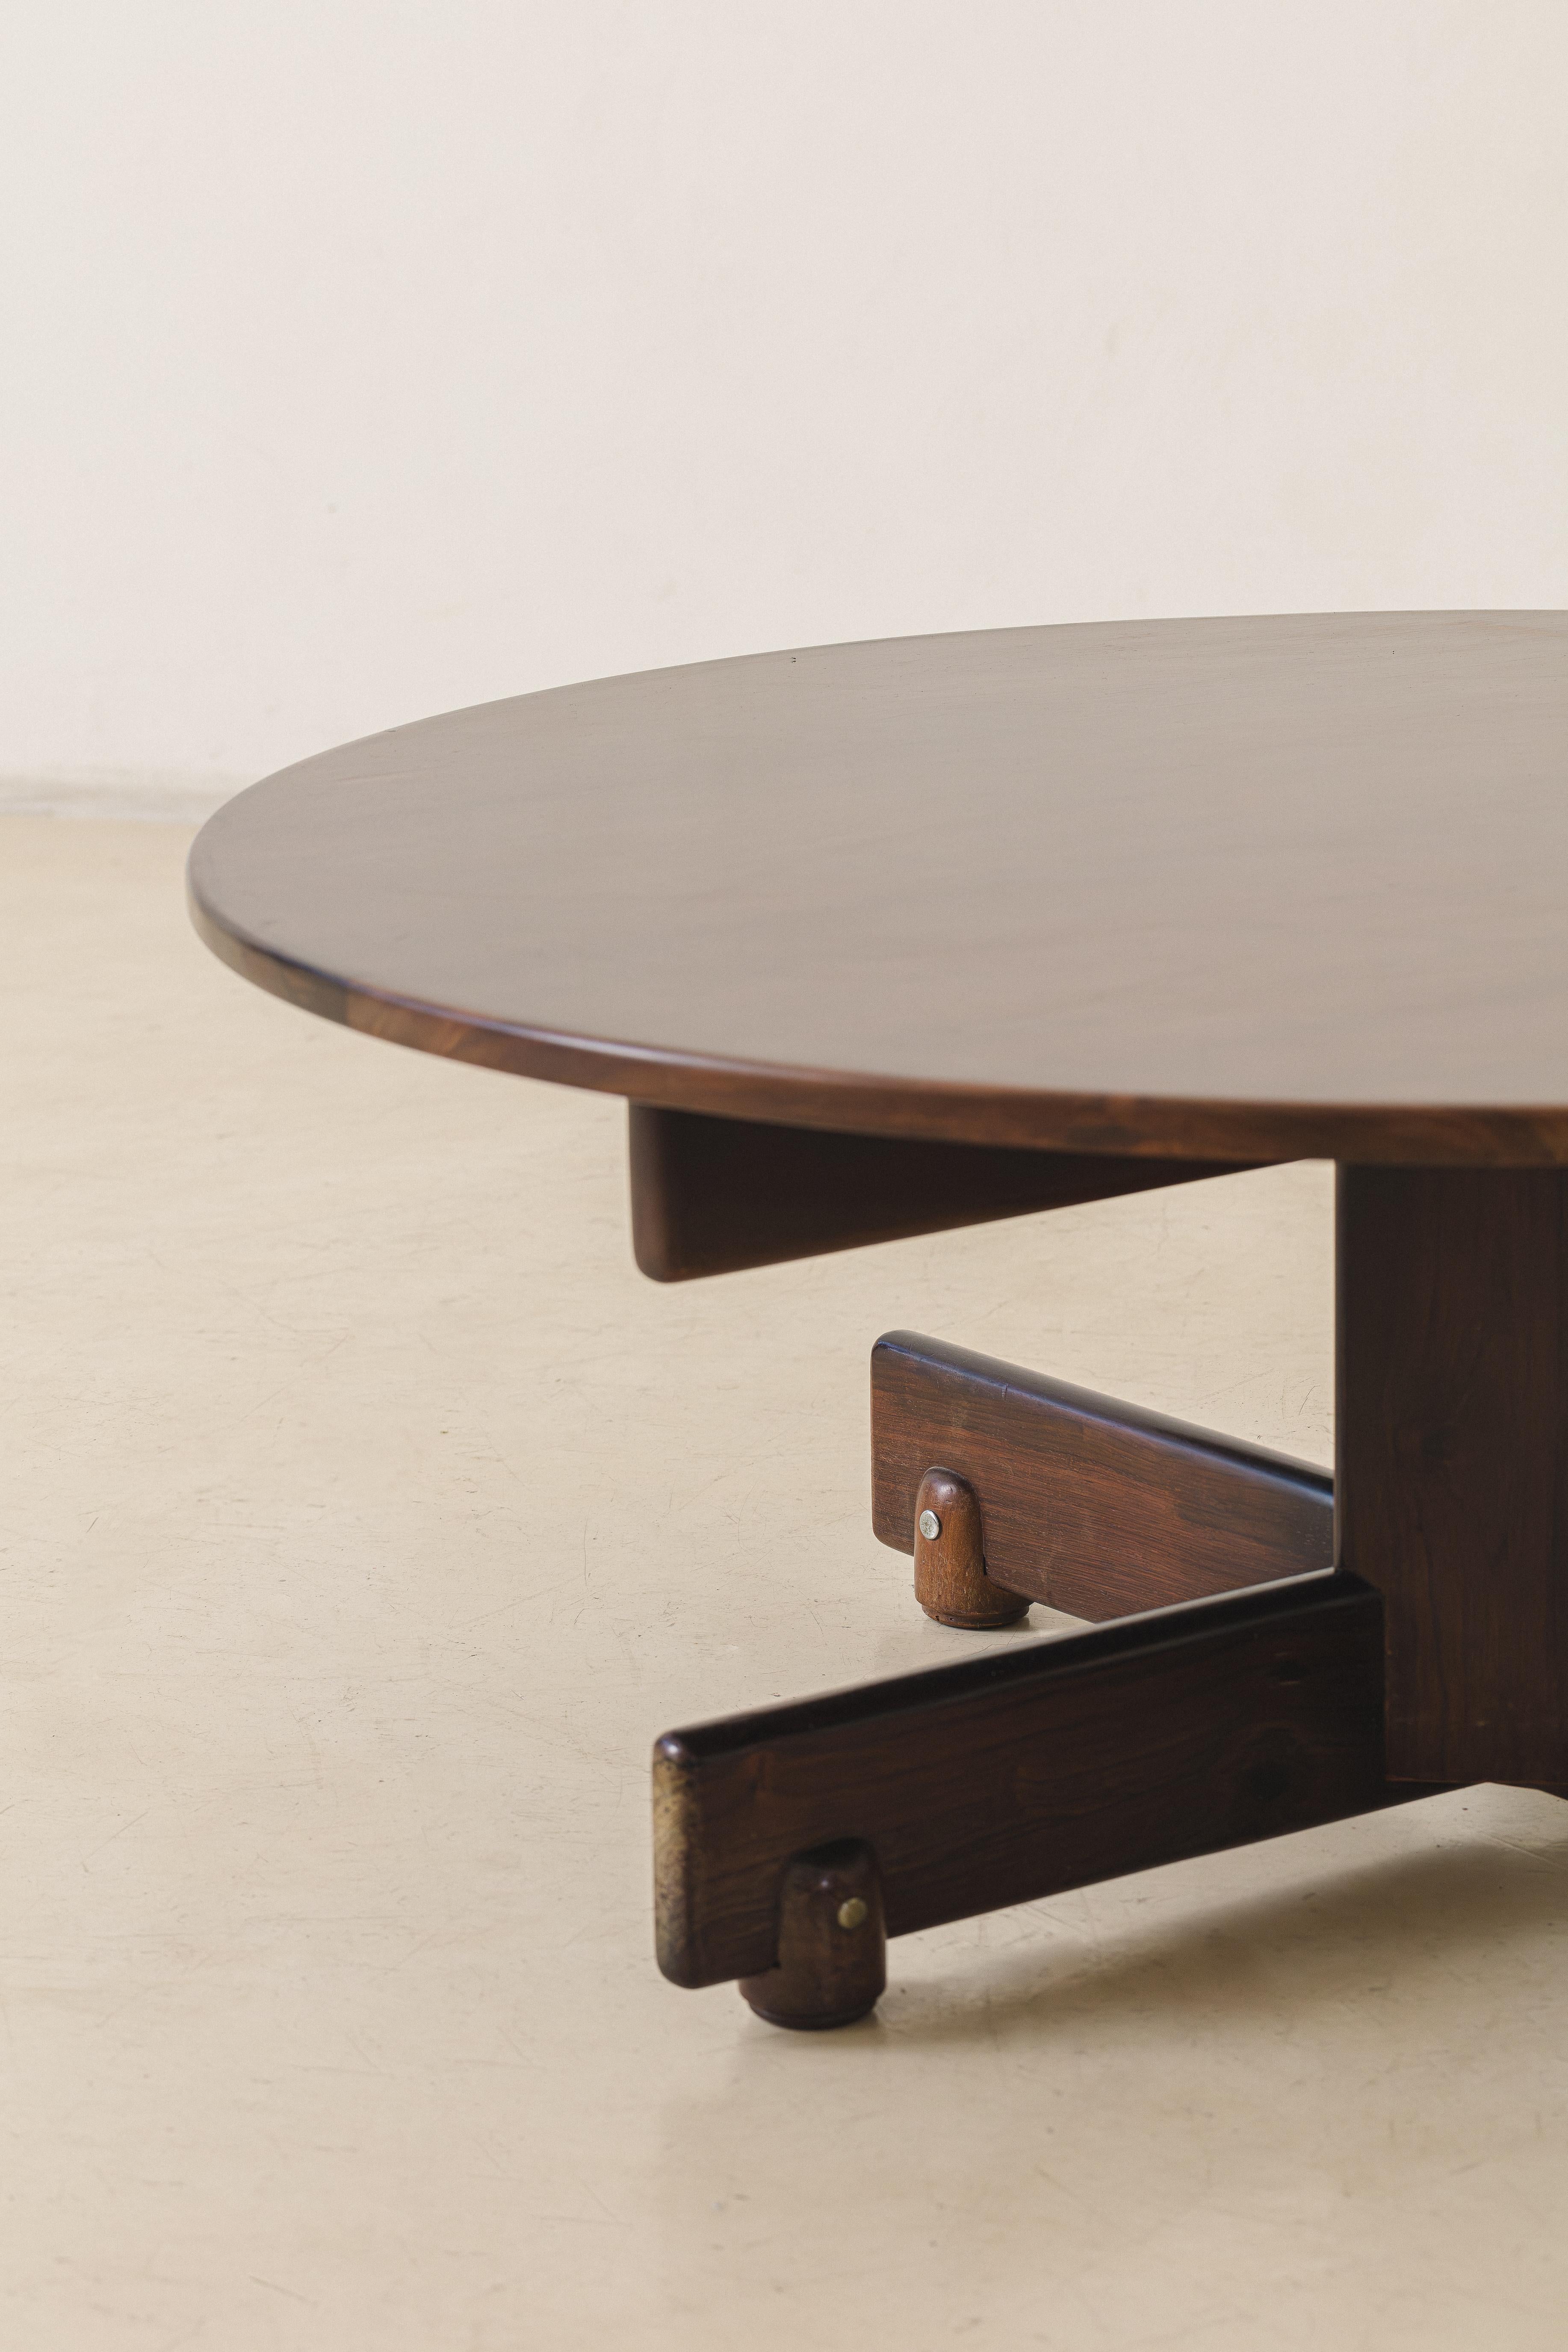 Wood Solid Rosewood Alex Coffee Table Design by Sergio Rodrigues, Oca, Brazil, 1960.  For Sale